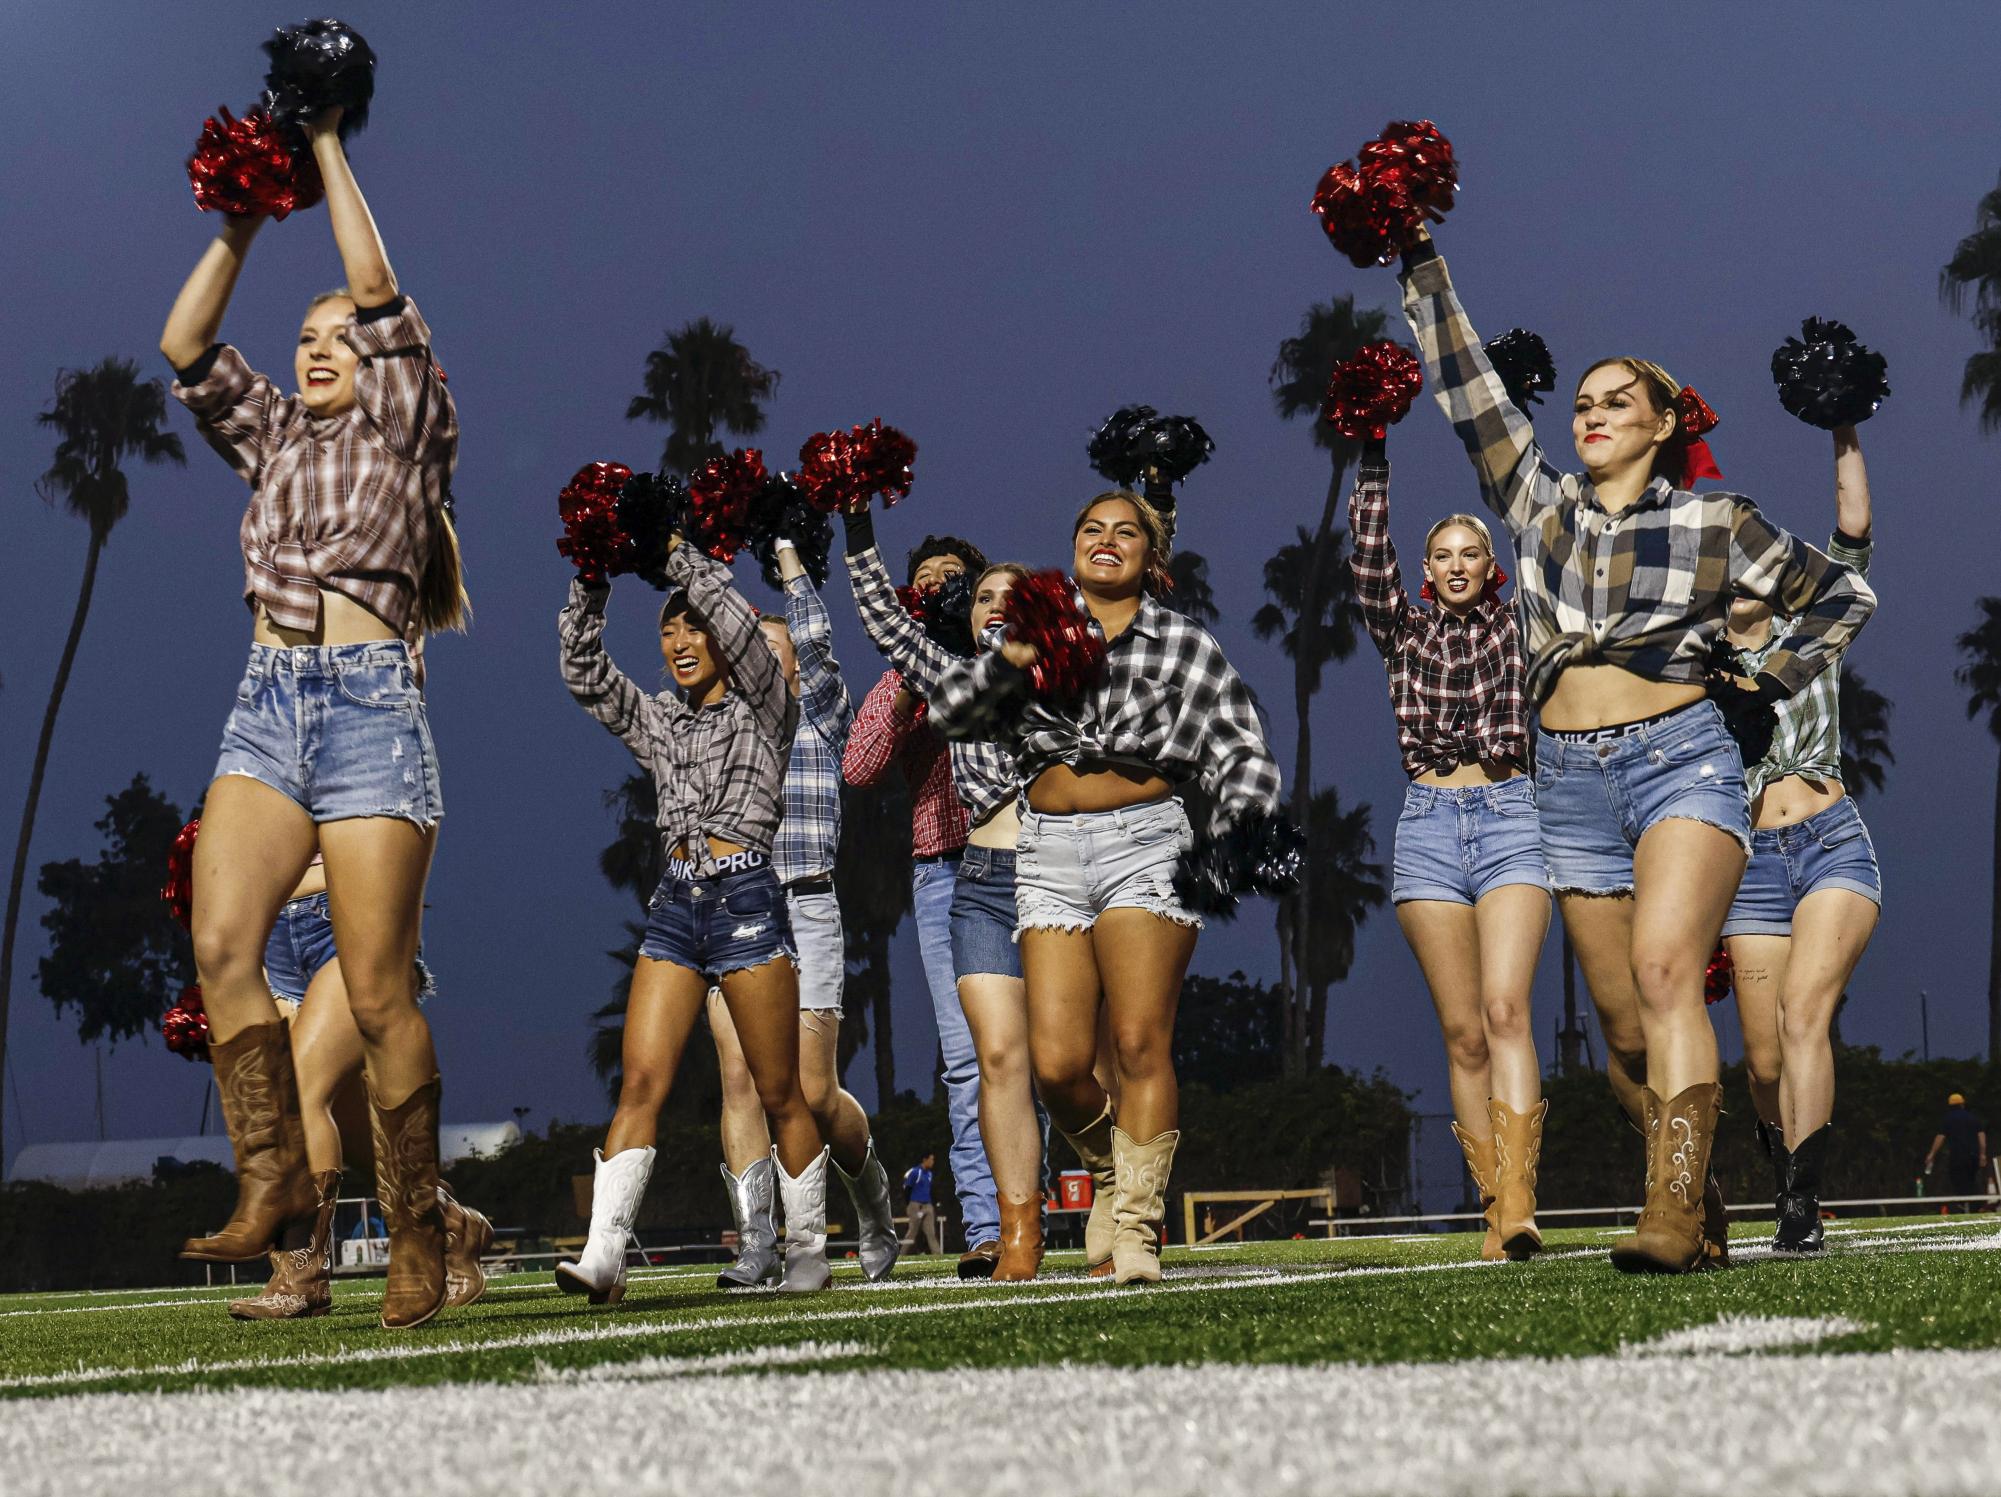 The cheerleading team performs on September 23 at City Colleges La Playa stadium in Santa Barbara, Calif. The cheer program returned this fall after a three year hiatus.